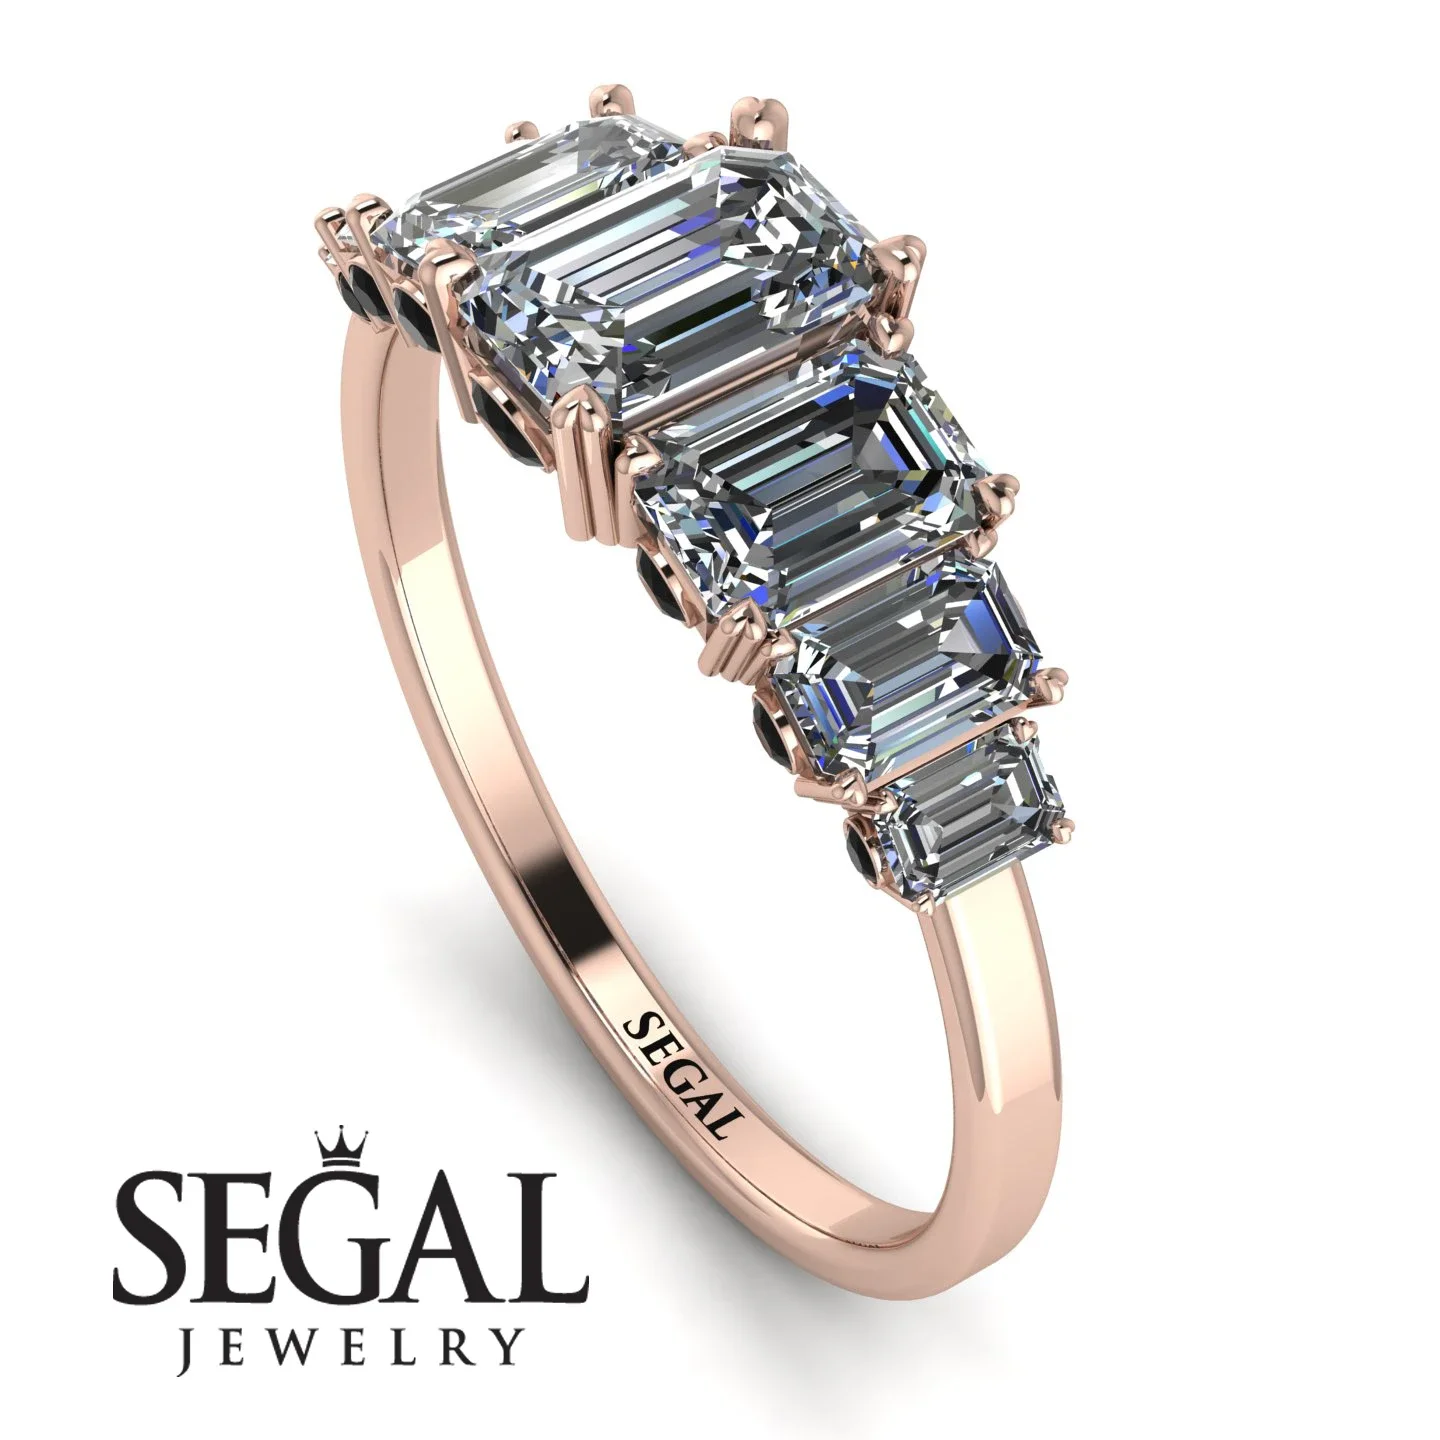 Image of Emerald Cut Diamond Ring With Hidden Diamonds - Brynlee No. 32